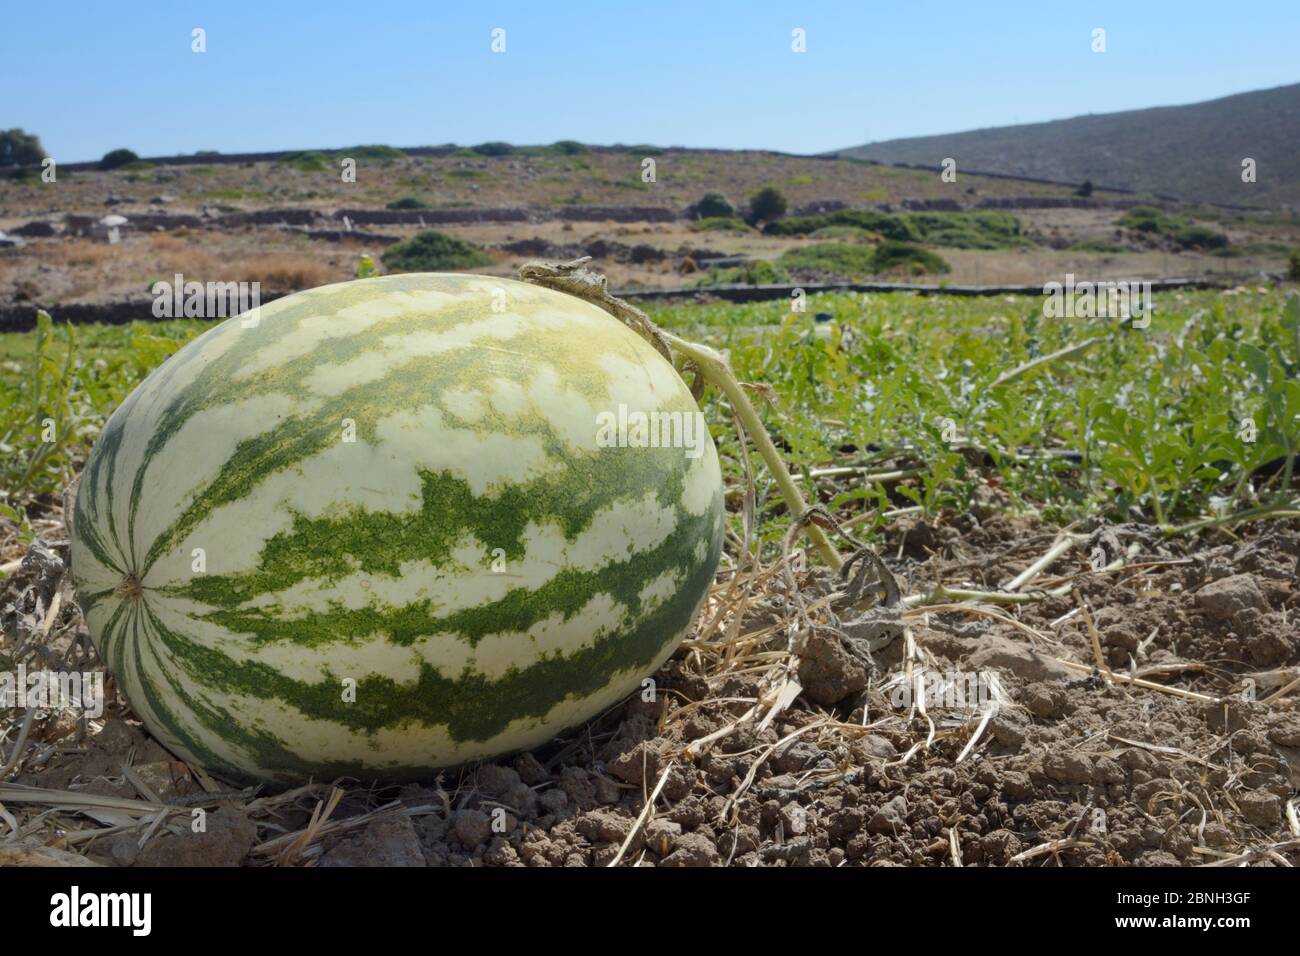 Watermelon (Citrullus lanatus) cultivated plant growing in field, Kos, Greece, August 2013. Stock Photo